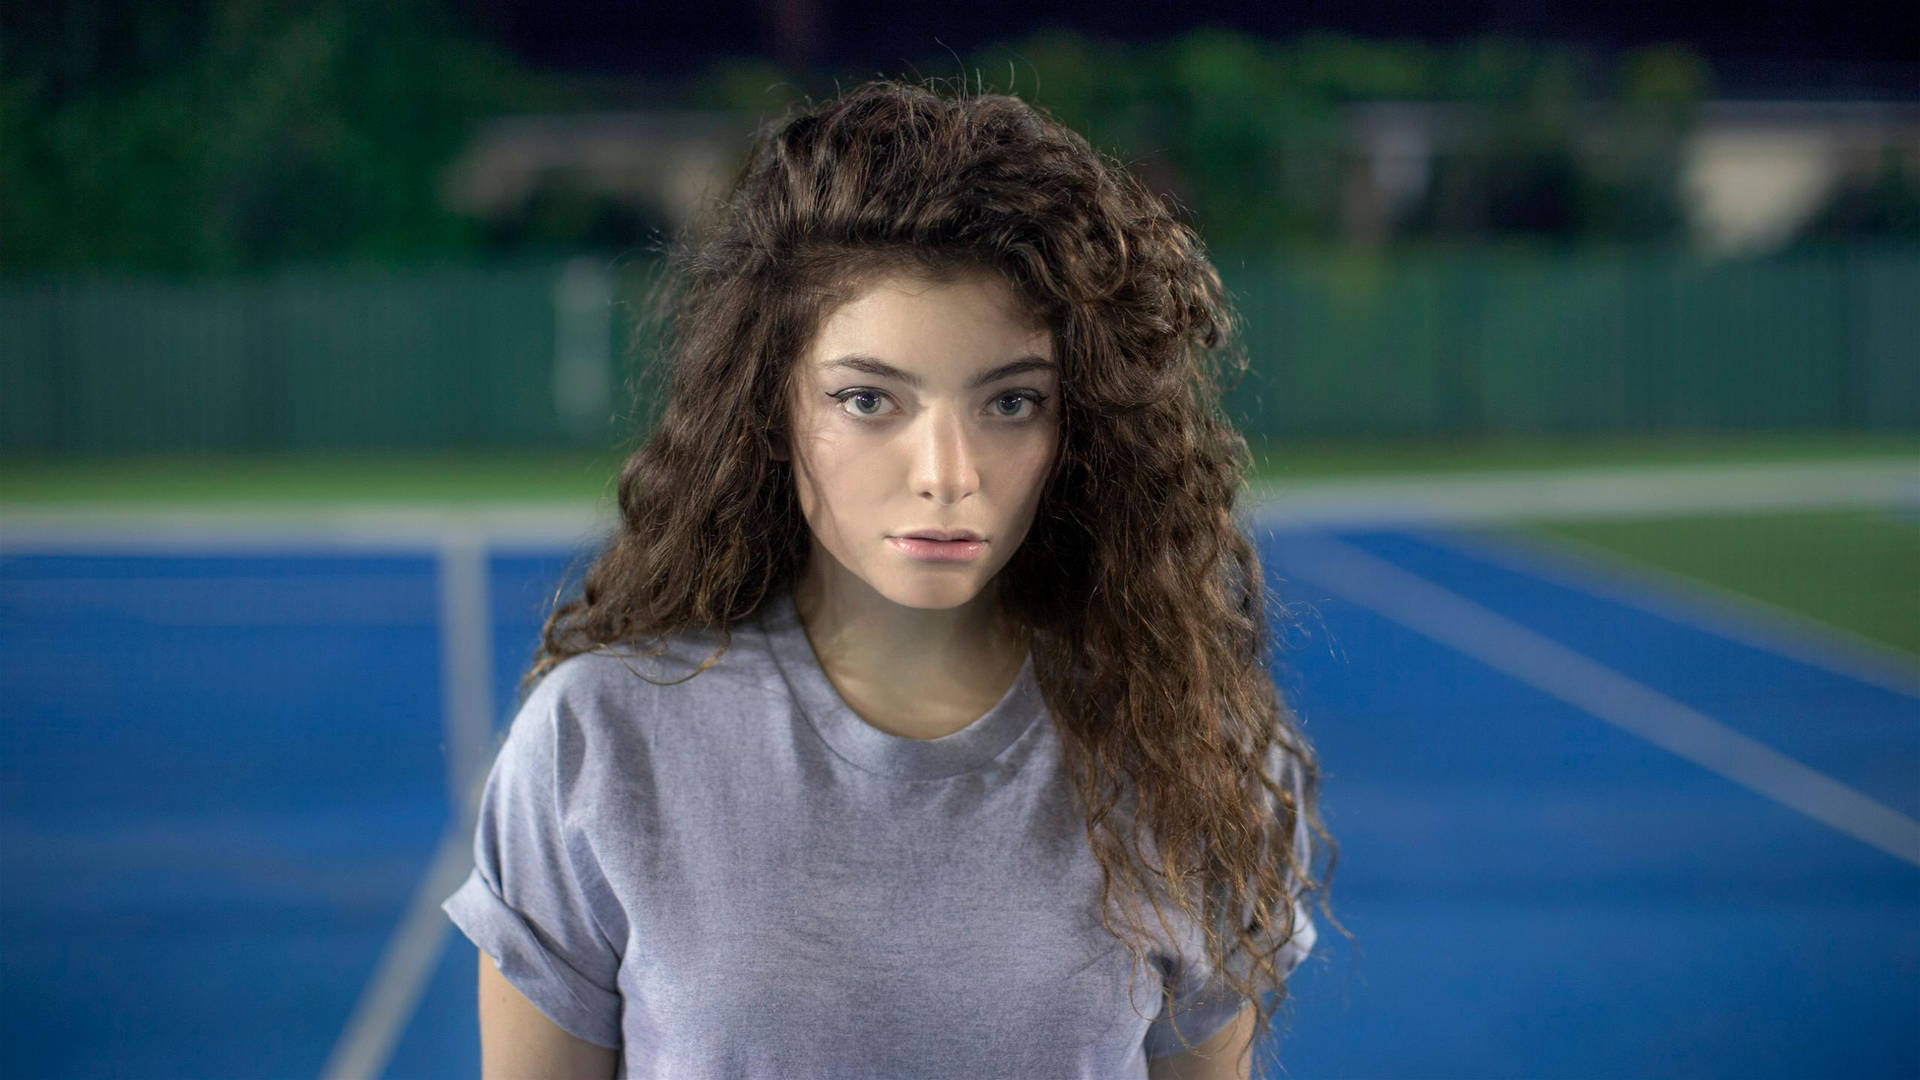 Lorde In Tennis Court Background